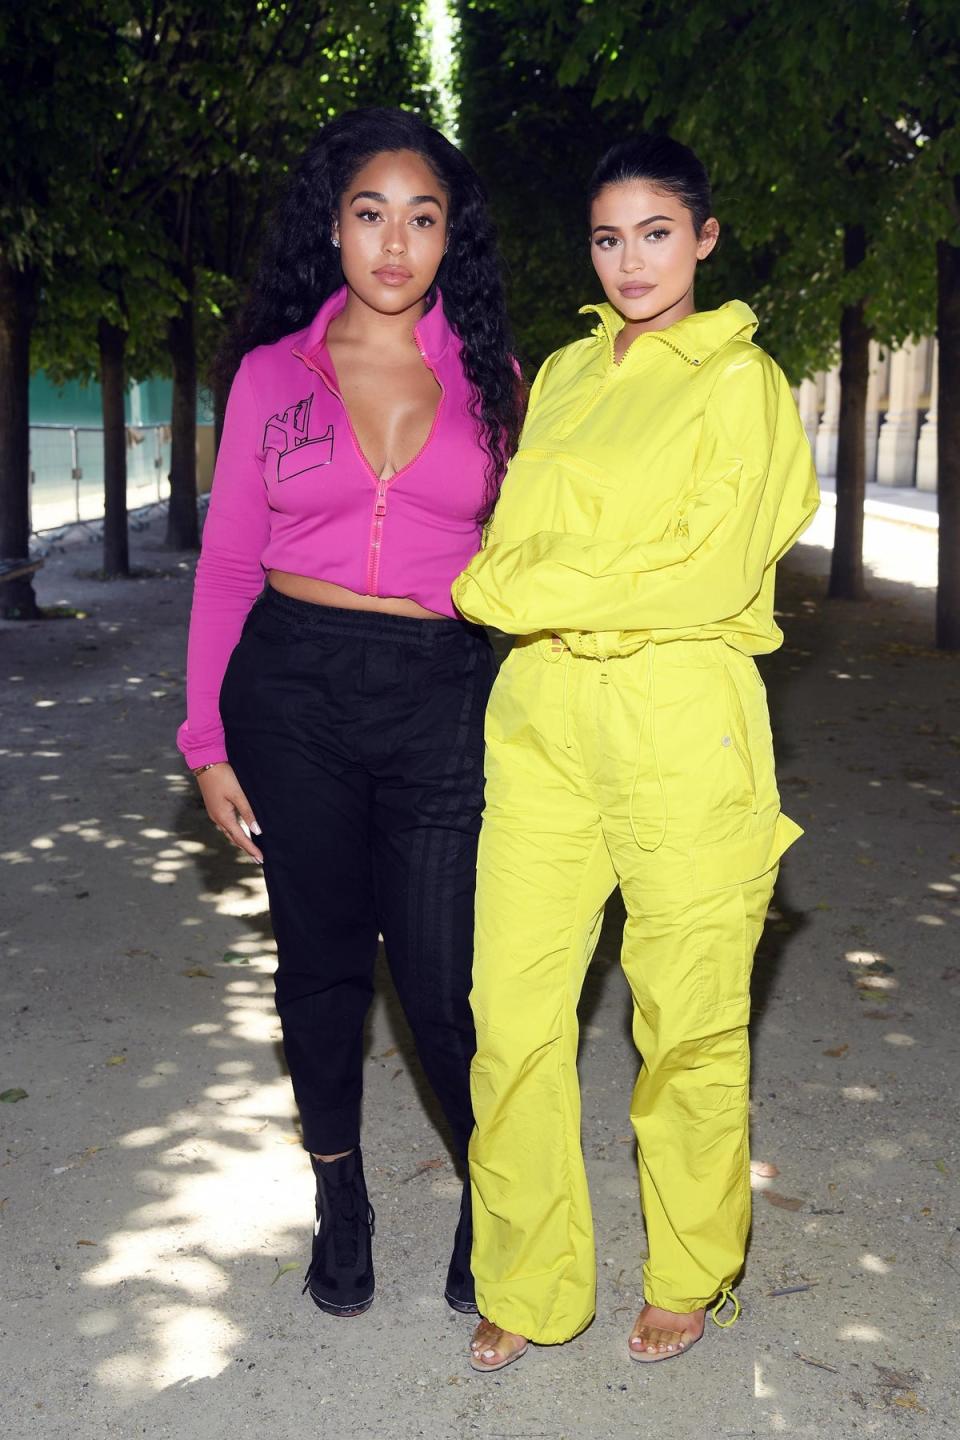 Jordyn Woods  and Kylie Jenner attend the Louis Vuitton Menswear Spring/Summer 2019 (Pascal Le Segretain / Getty Images)